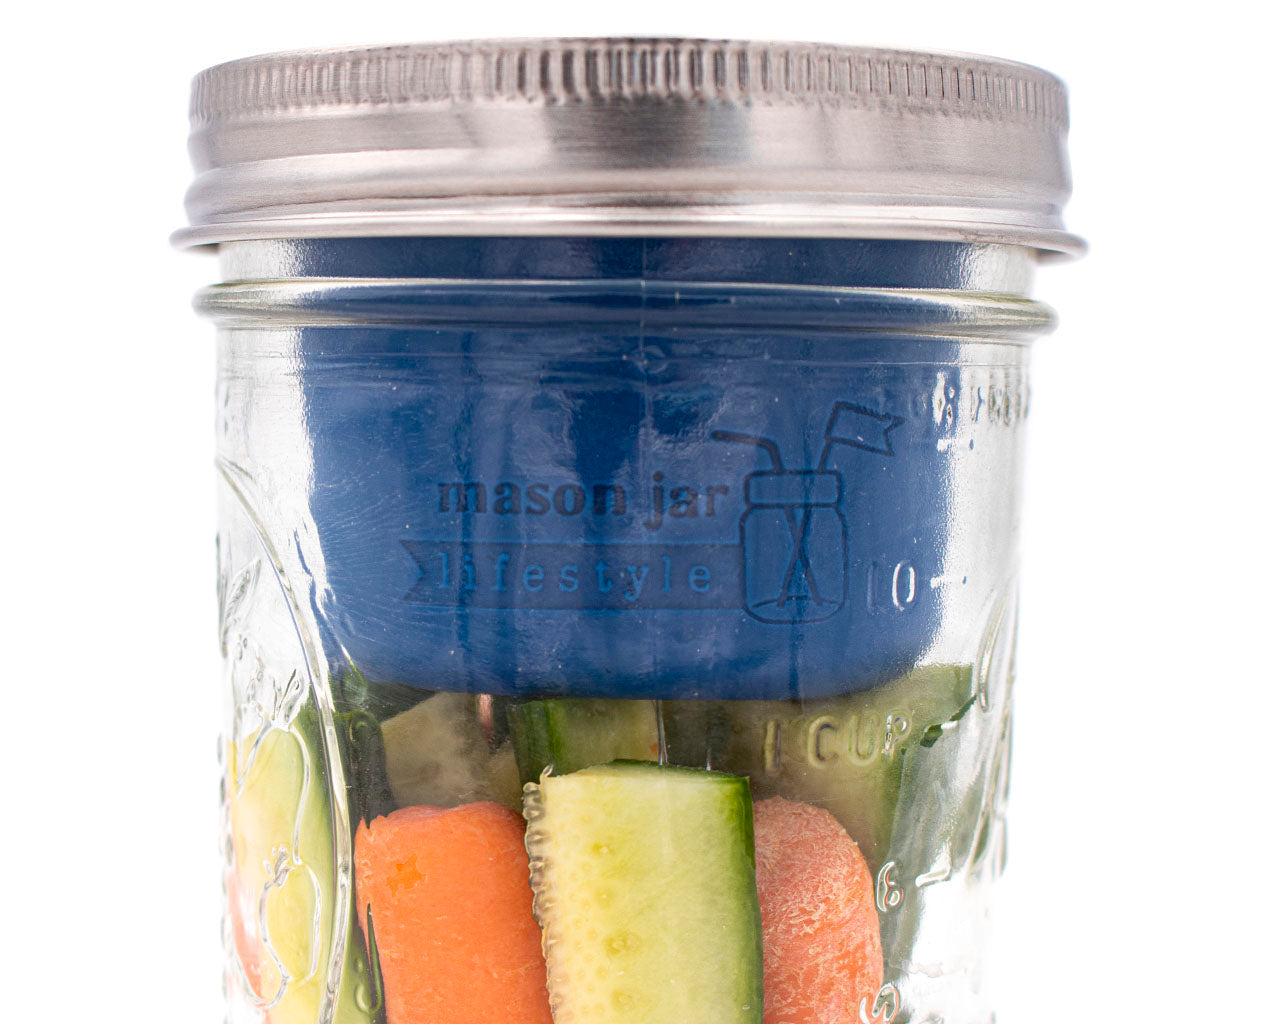 wide mouth deep blue silicone divider cup with stainless steel storage lid on 16oz wide mouth pint jar with carrots and veggies